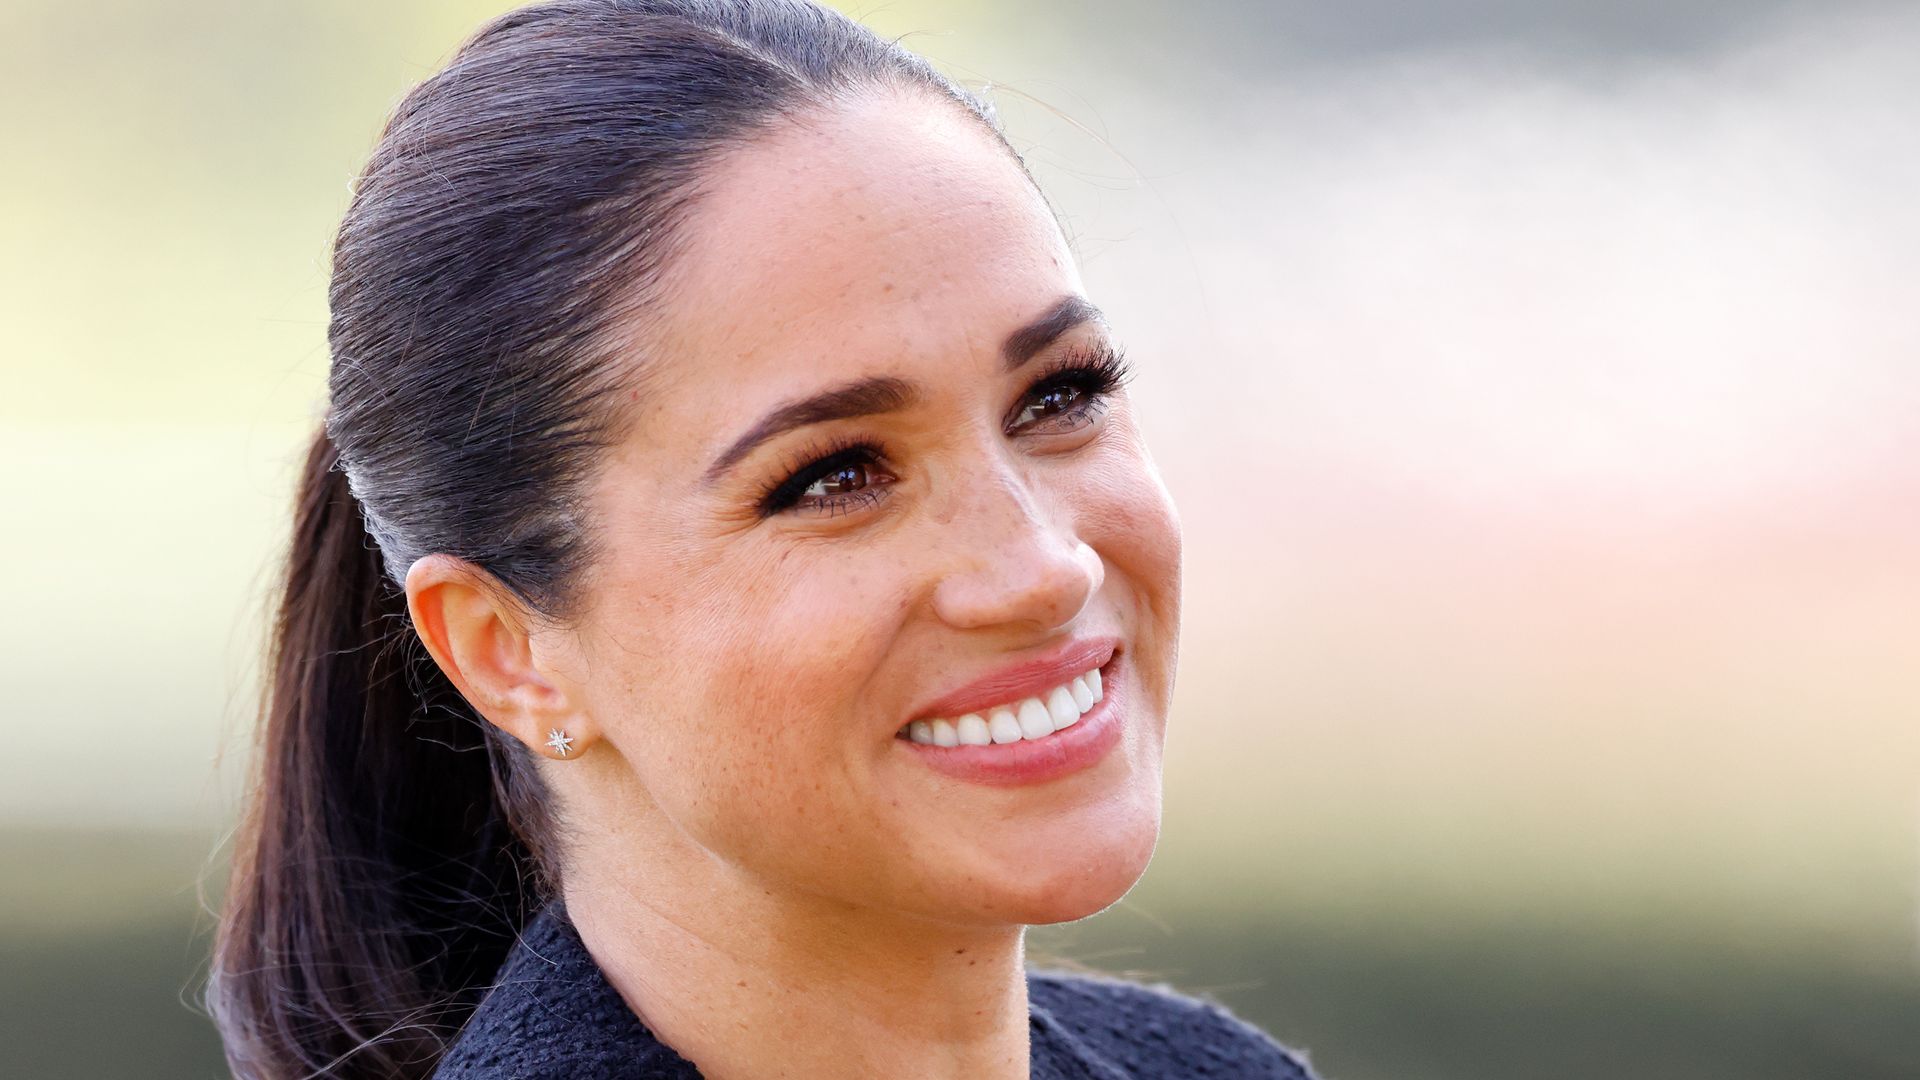 Meghan Markle's obsession with Pilates builds 'full body strength and stability'